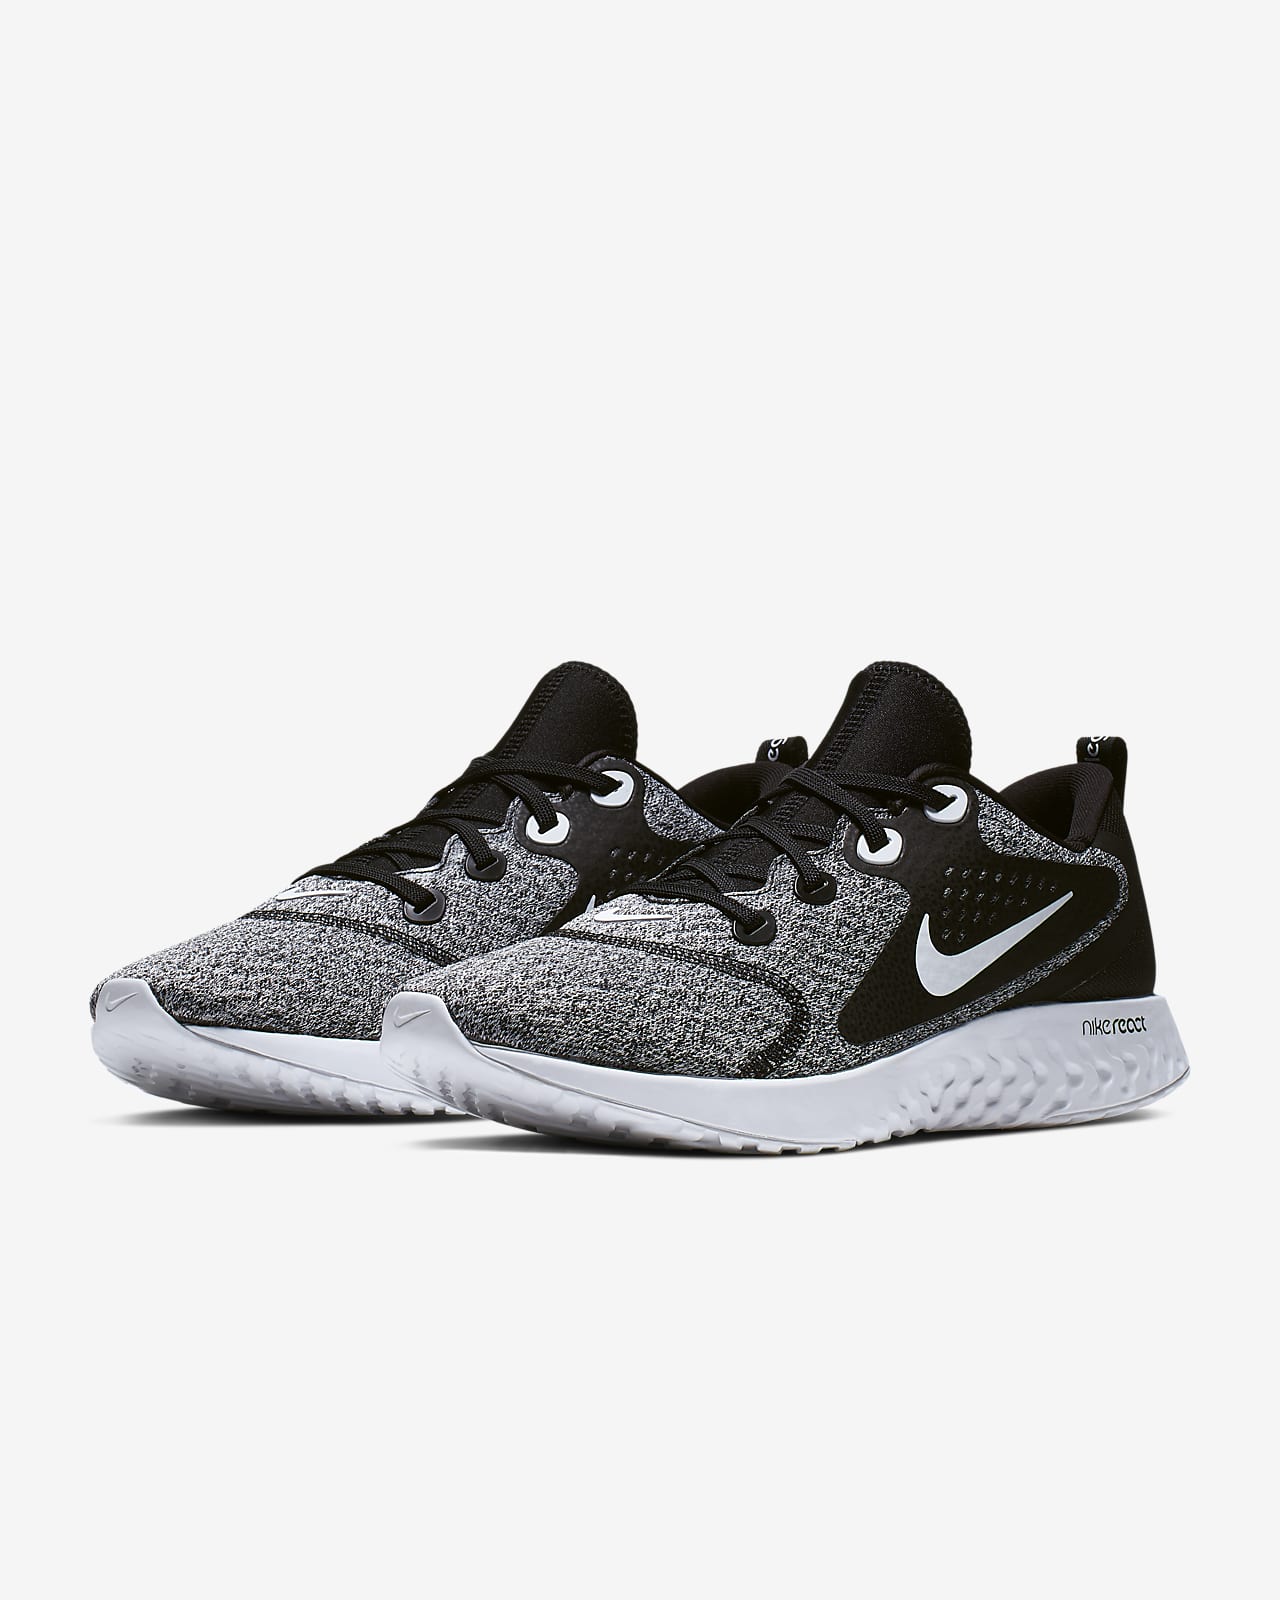 nike running legend react trainers in black and white